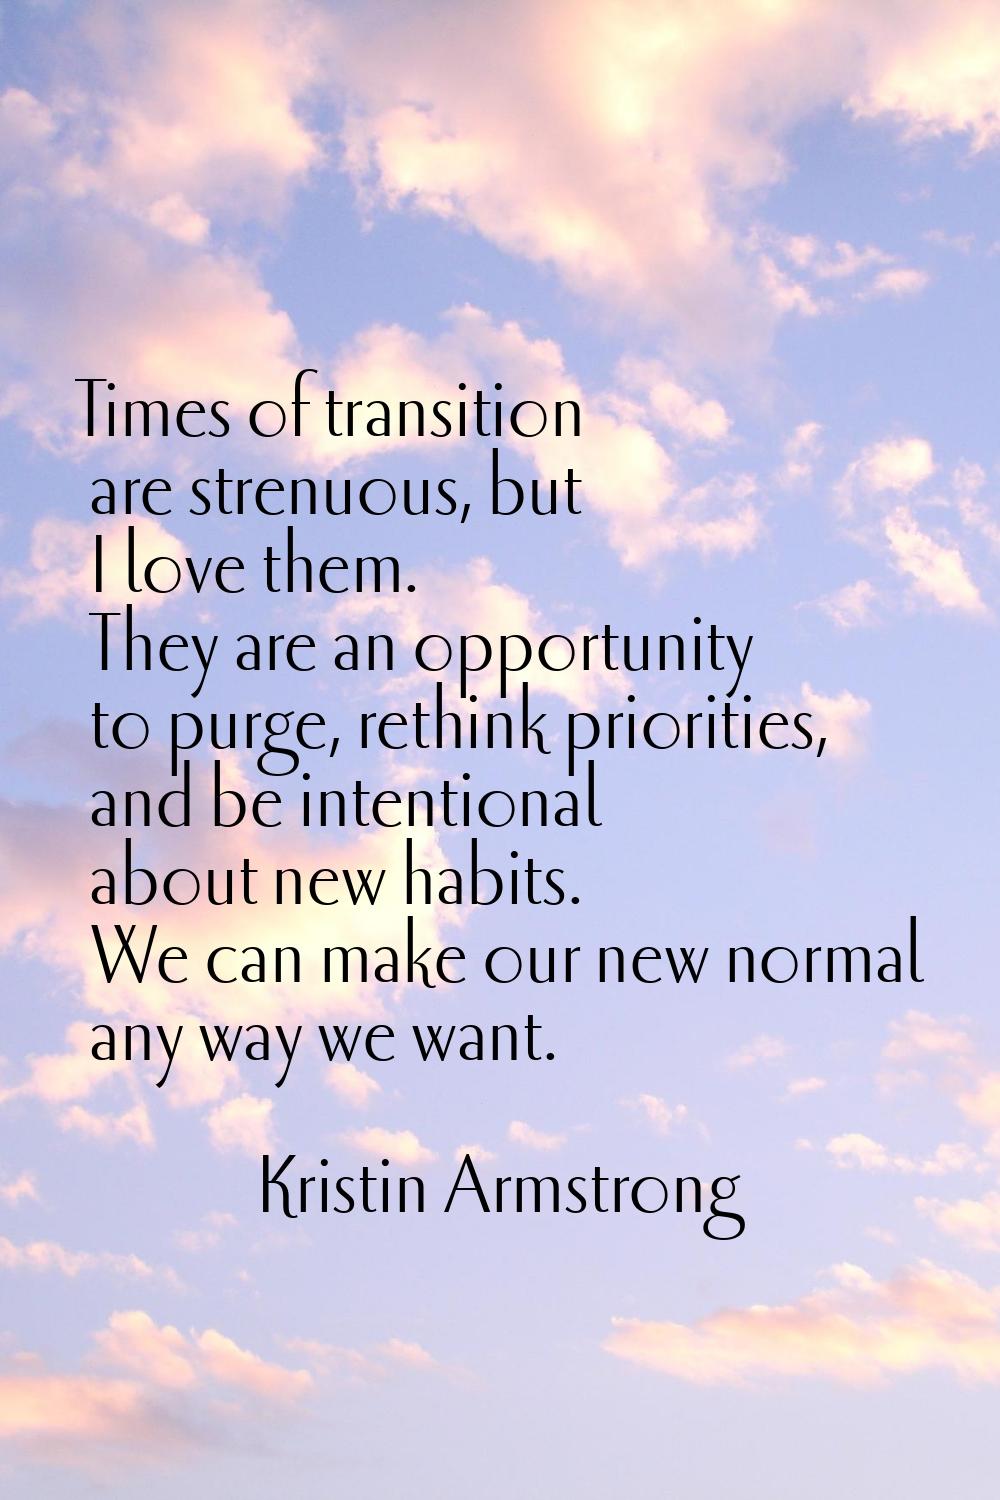 Times of transition are strenuous, but I love them. They are an opportunity to purge, rethink prior